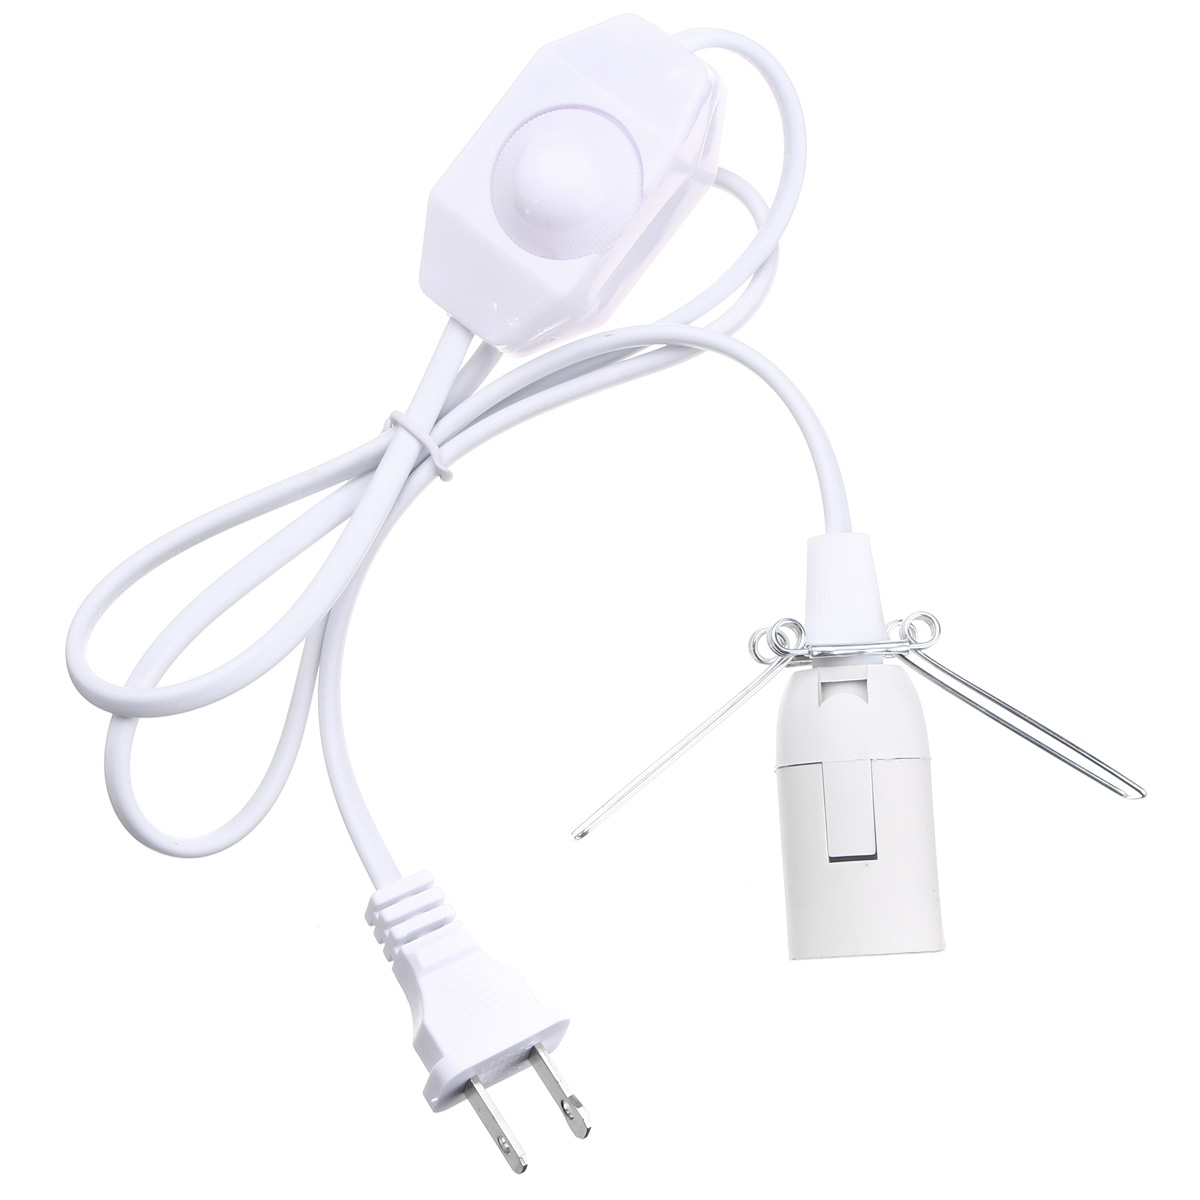 1M-E12-Socket-Bulb-Adapter-US-Plug-with-Dimmer-Cable-Cord-Switch-for-Himalayan-Salt-Lamp-Electric-1301444-2